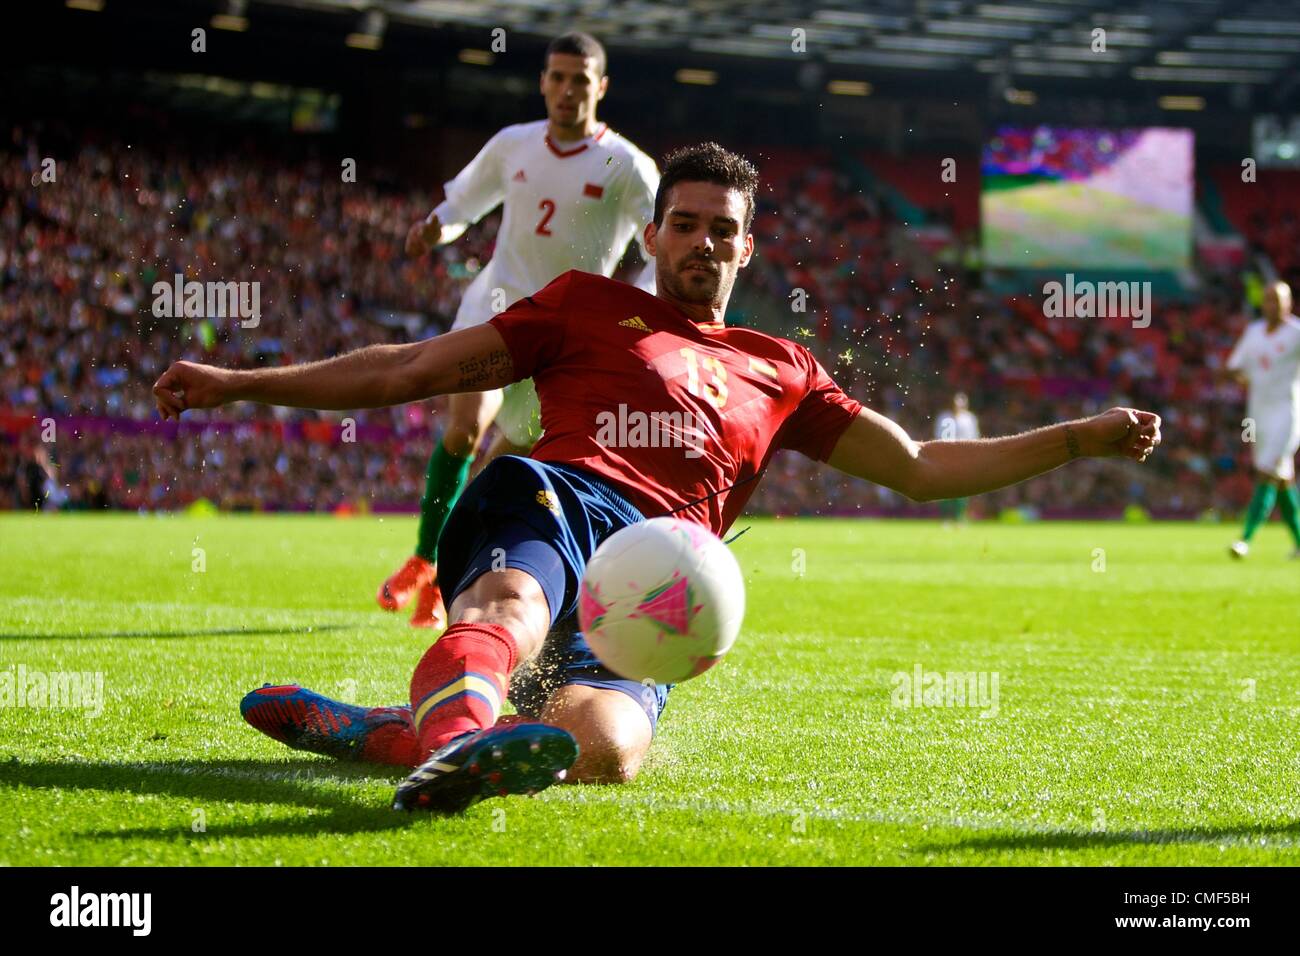 01.08.2012 Manchester, England. Spain defender Alberto Botía in action during the third round group D mens match between Spain and Morocco at Old Trafford. Stock Photo